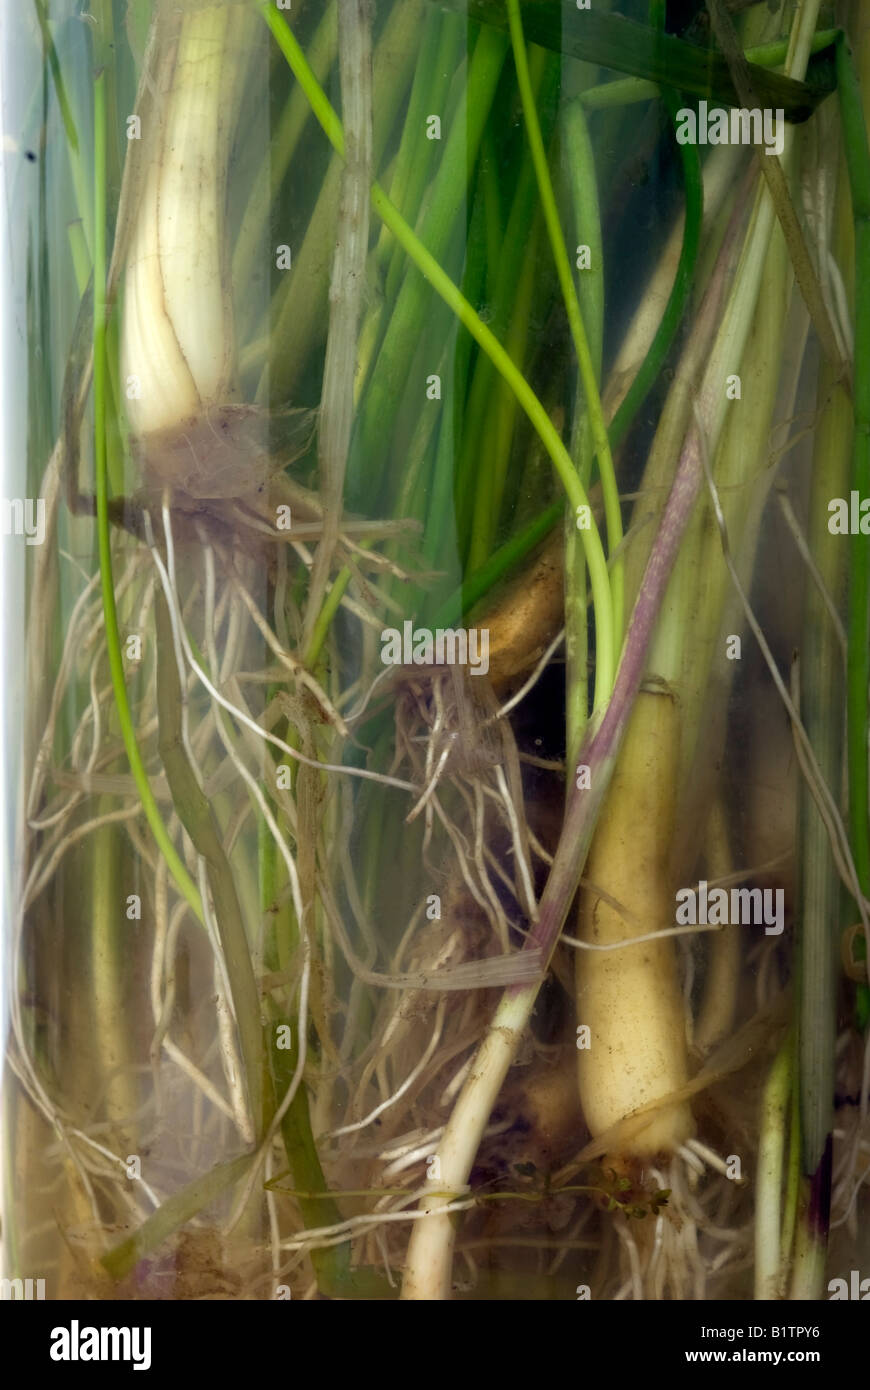 Scallions show their roots in water Stock Photo